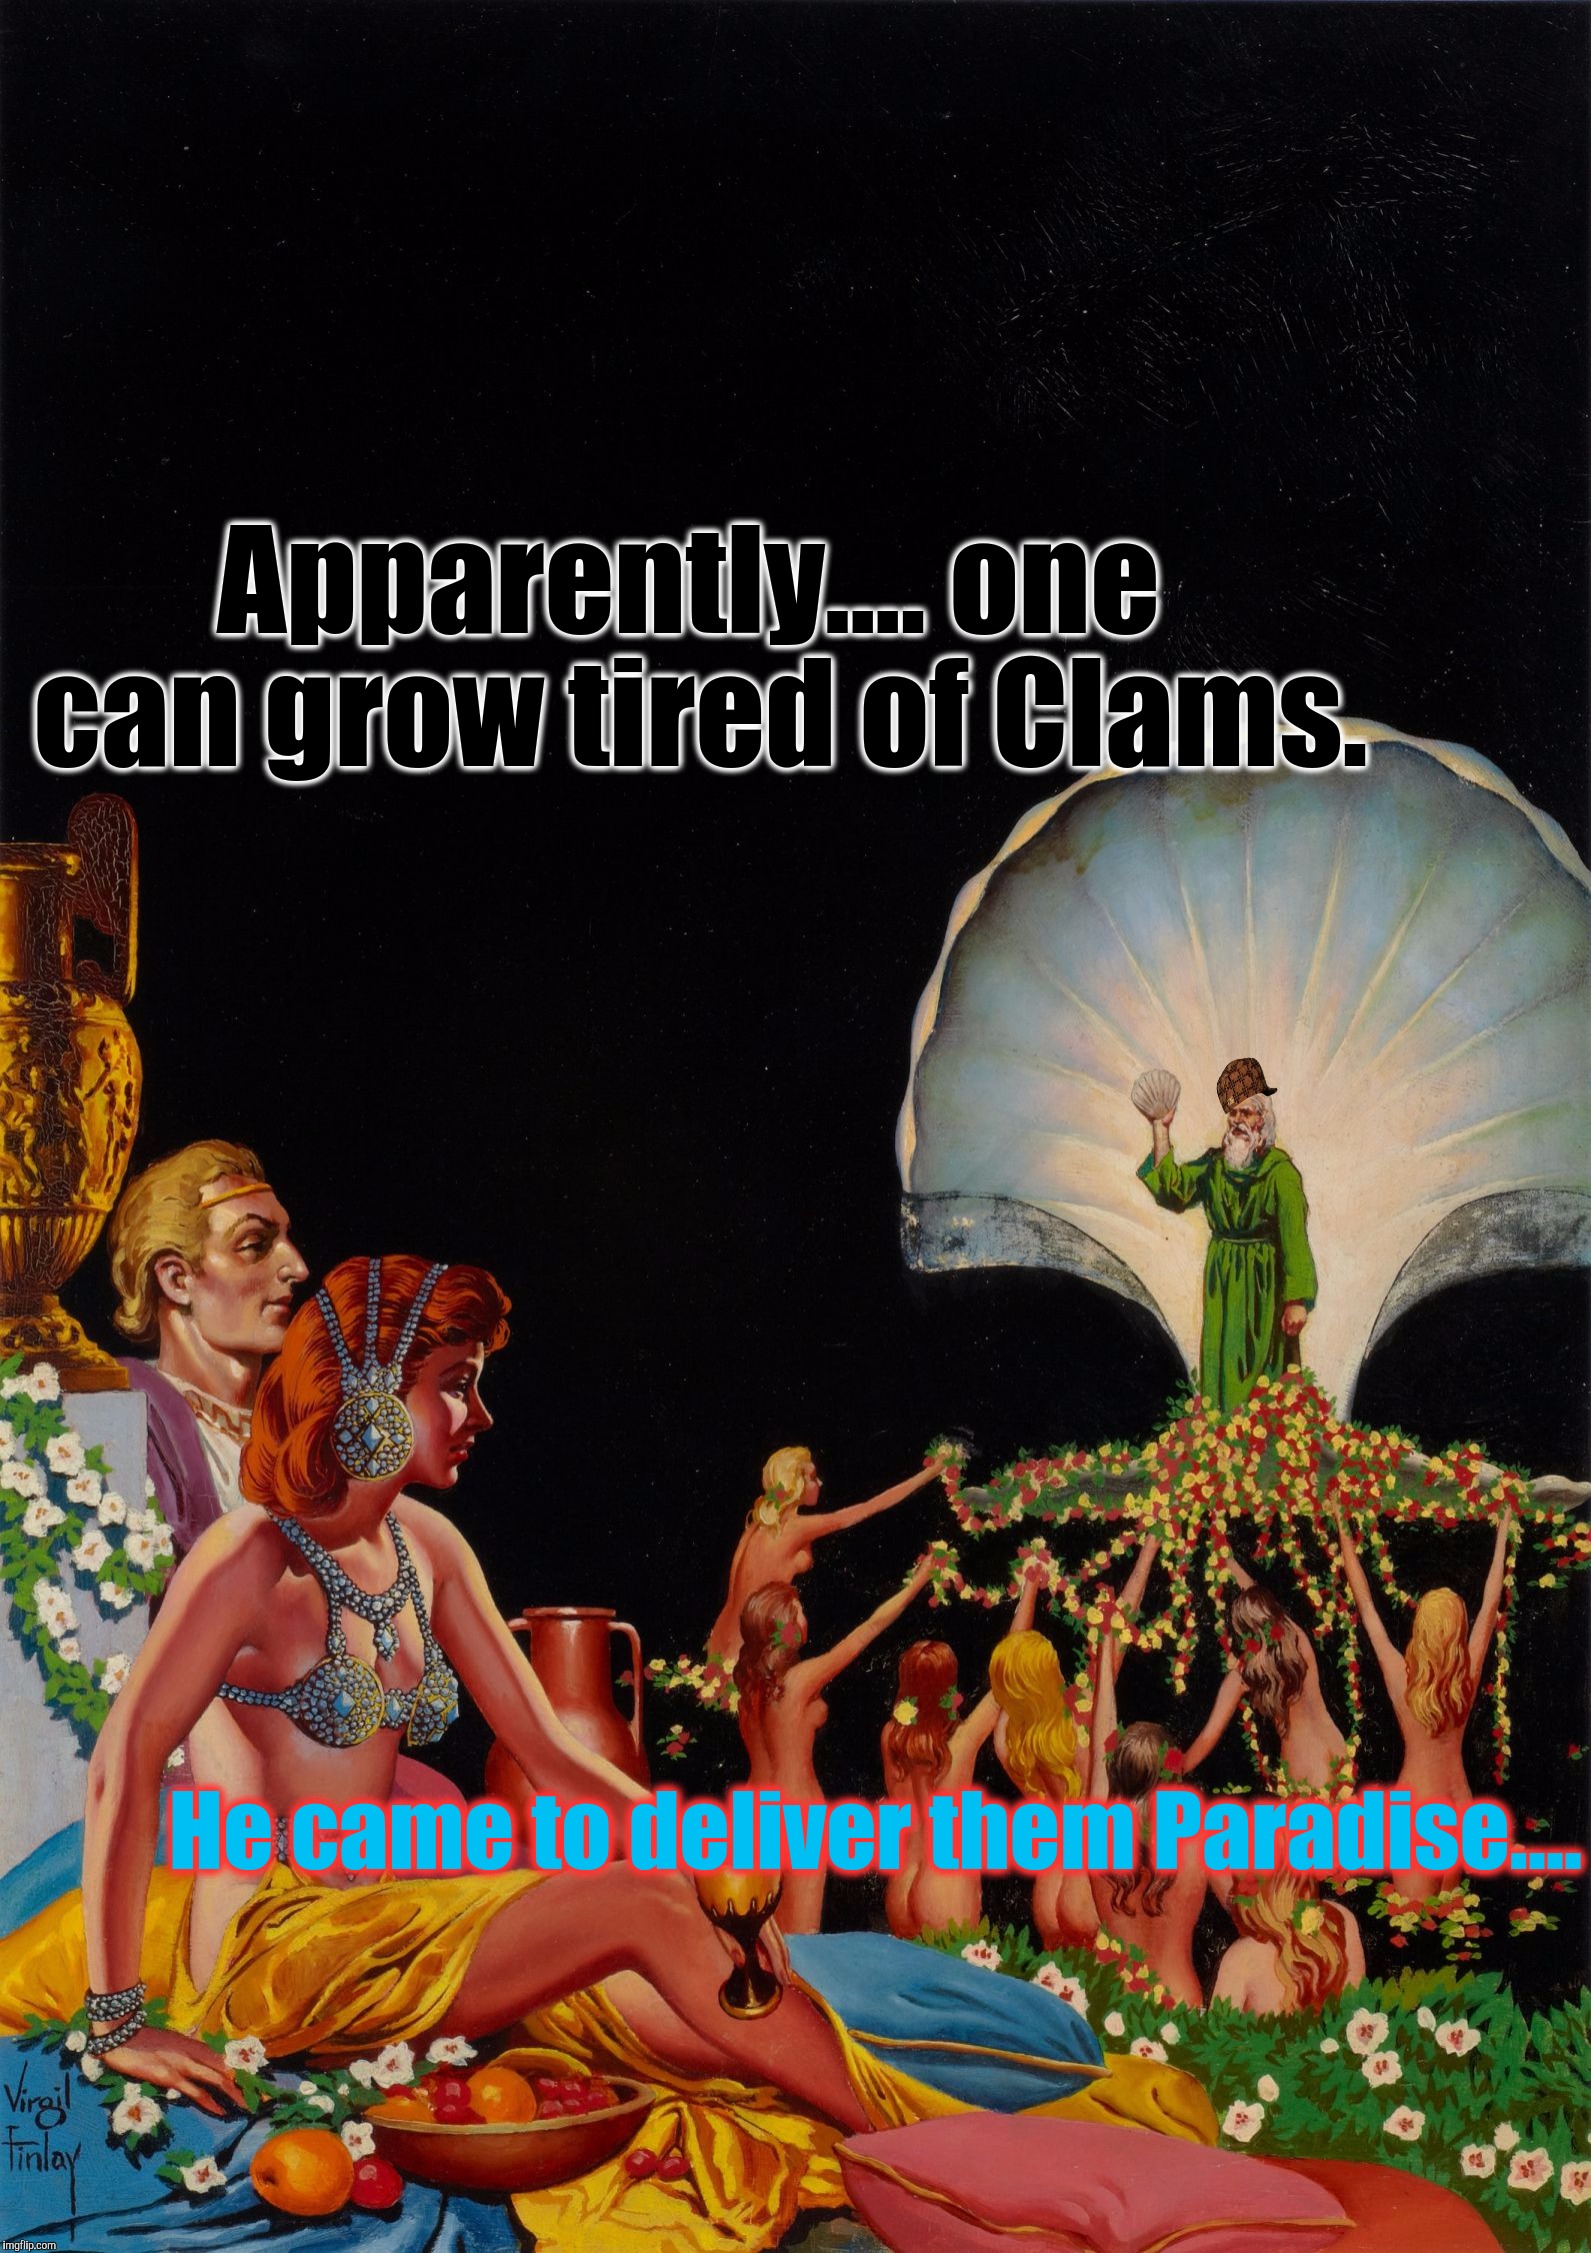 The promised one has arrived.... | Apparently.... one can grow tired of Clams. He came to deliver them Paradise.... | image tagged in the most intersting man in pulp art,scumbag,pulp art week,beautiful retro cultural stranger,cult of death,memes | made w/ Imgflip meme maker